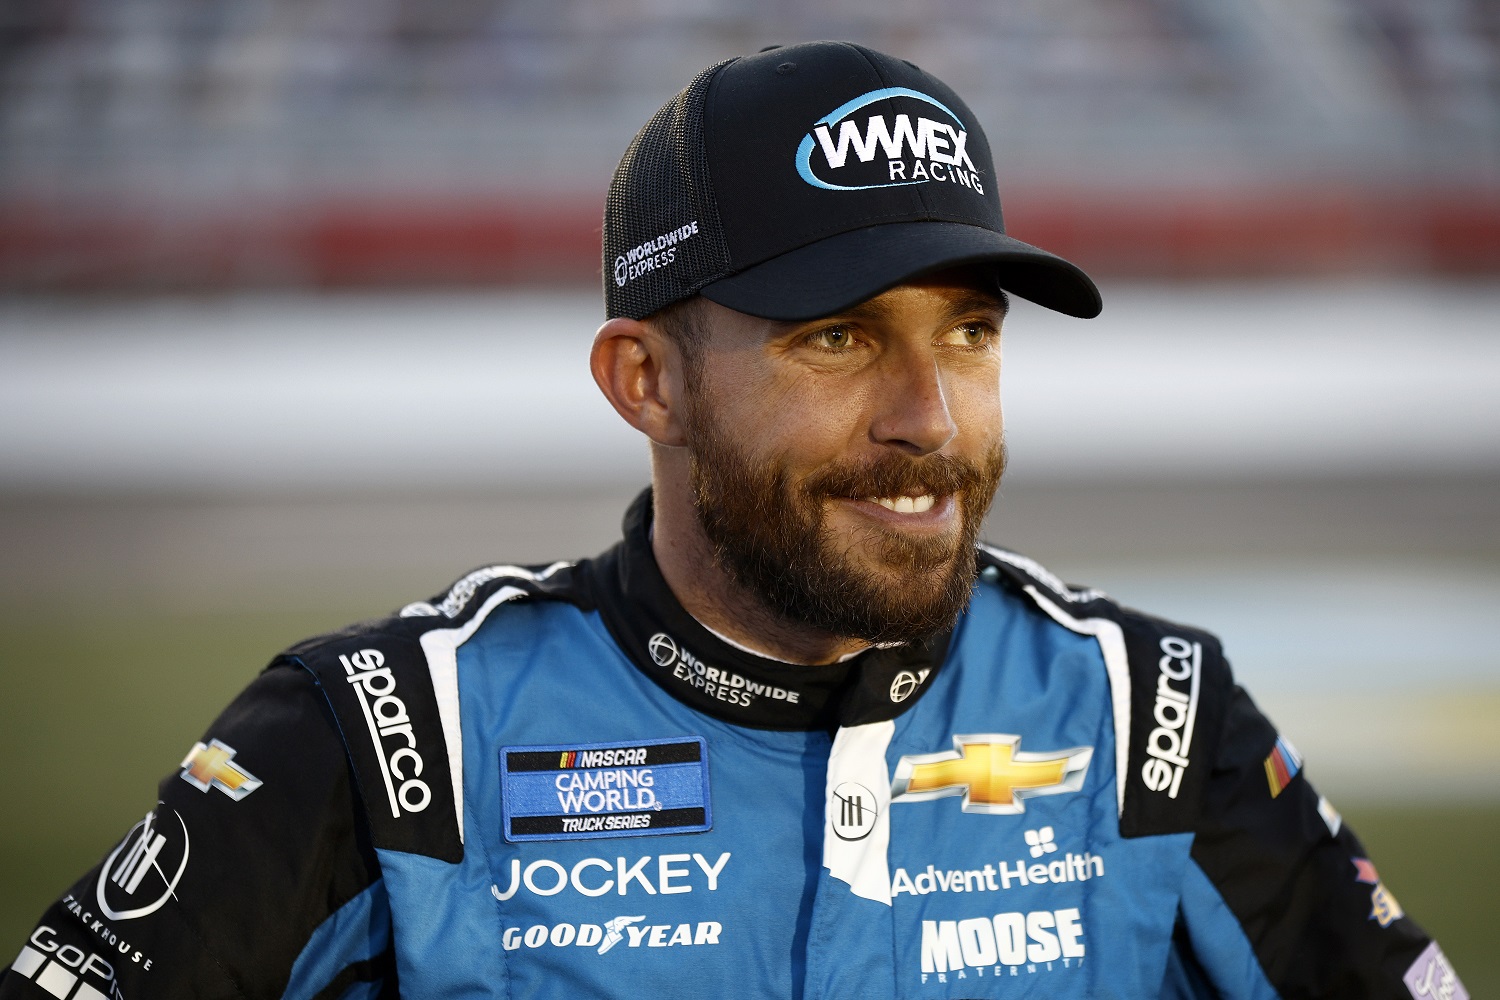 Ross Chastain waits on the grid prior to the NASCAR Camping World Truck Series race at Charlotte Motor Speedway on May 27, 2022. | Jared C. Tilton/Getty Images